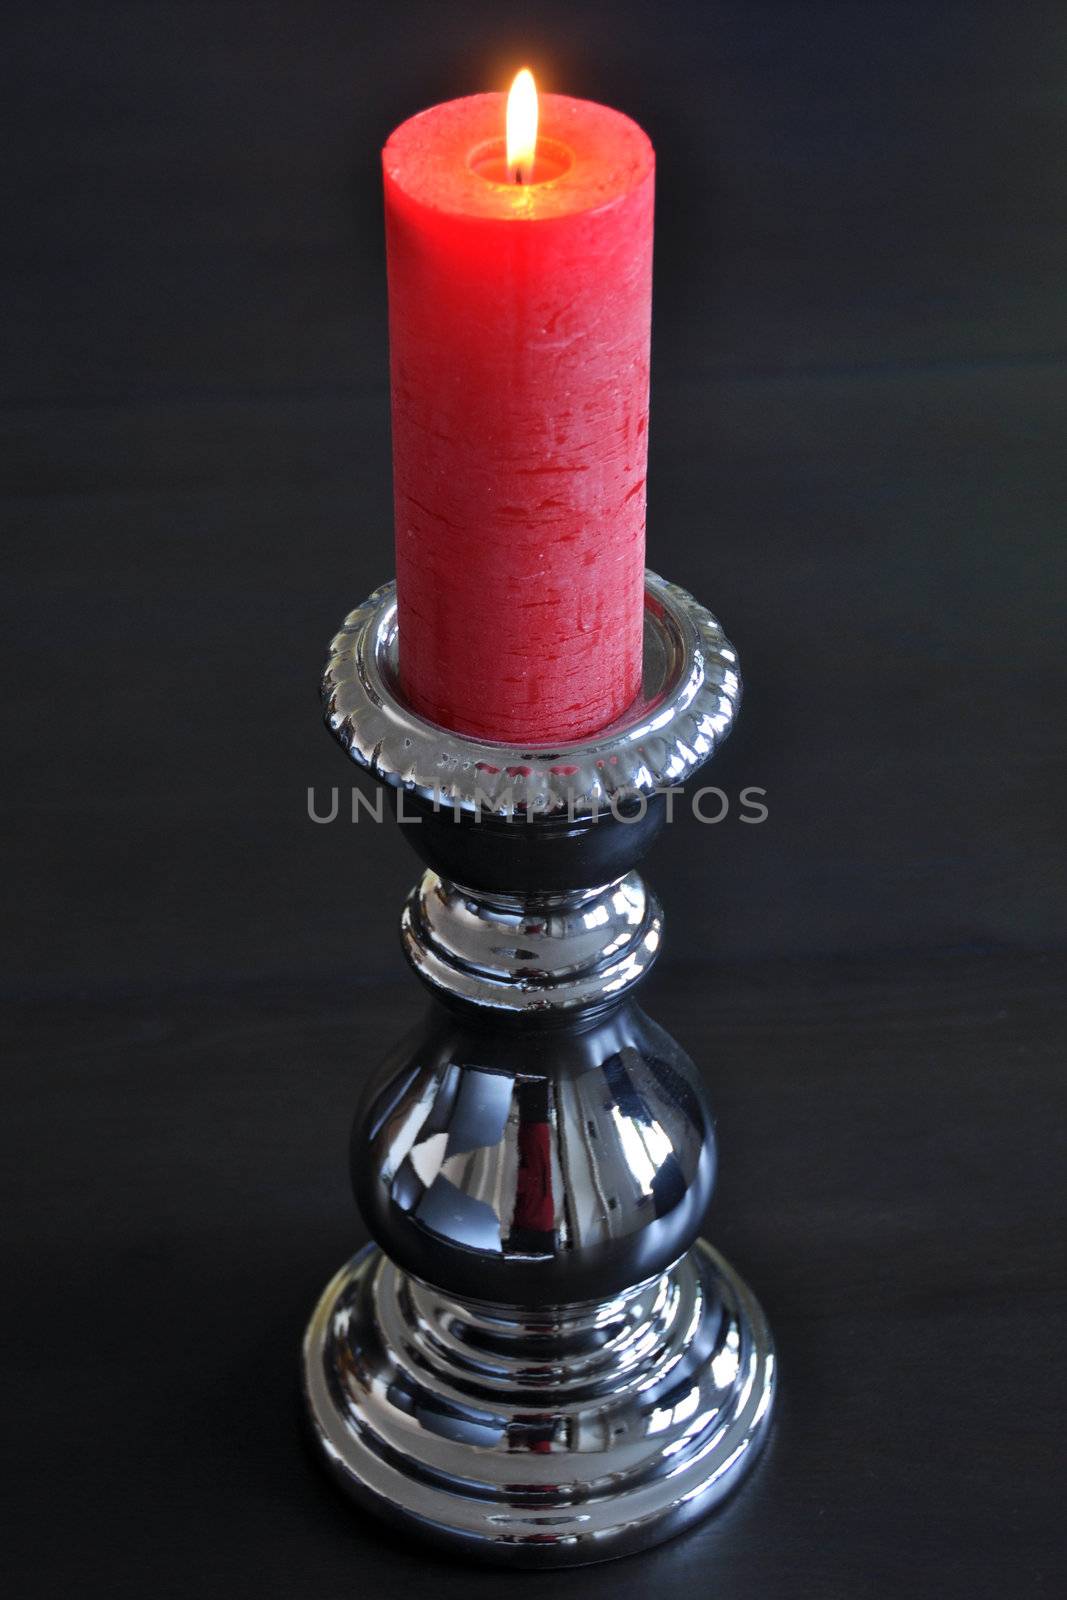 Burning red candle in silver holder by franky242